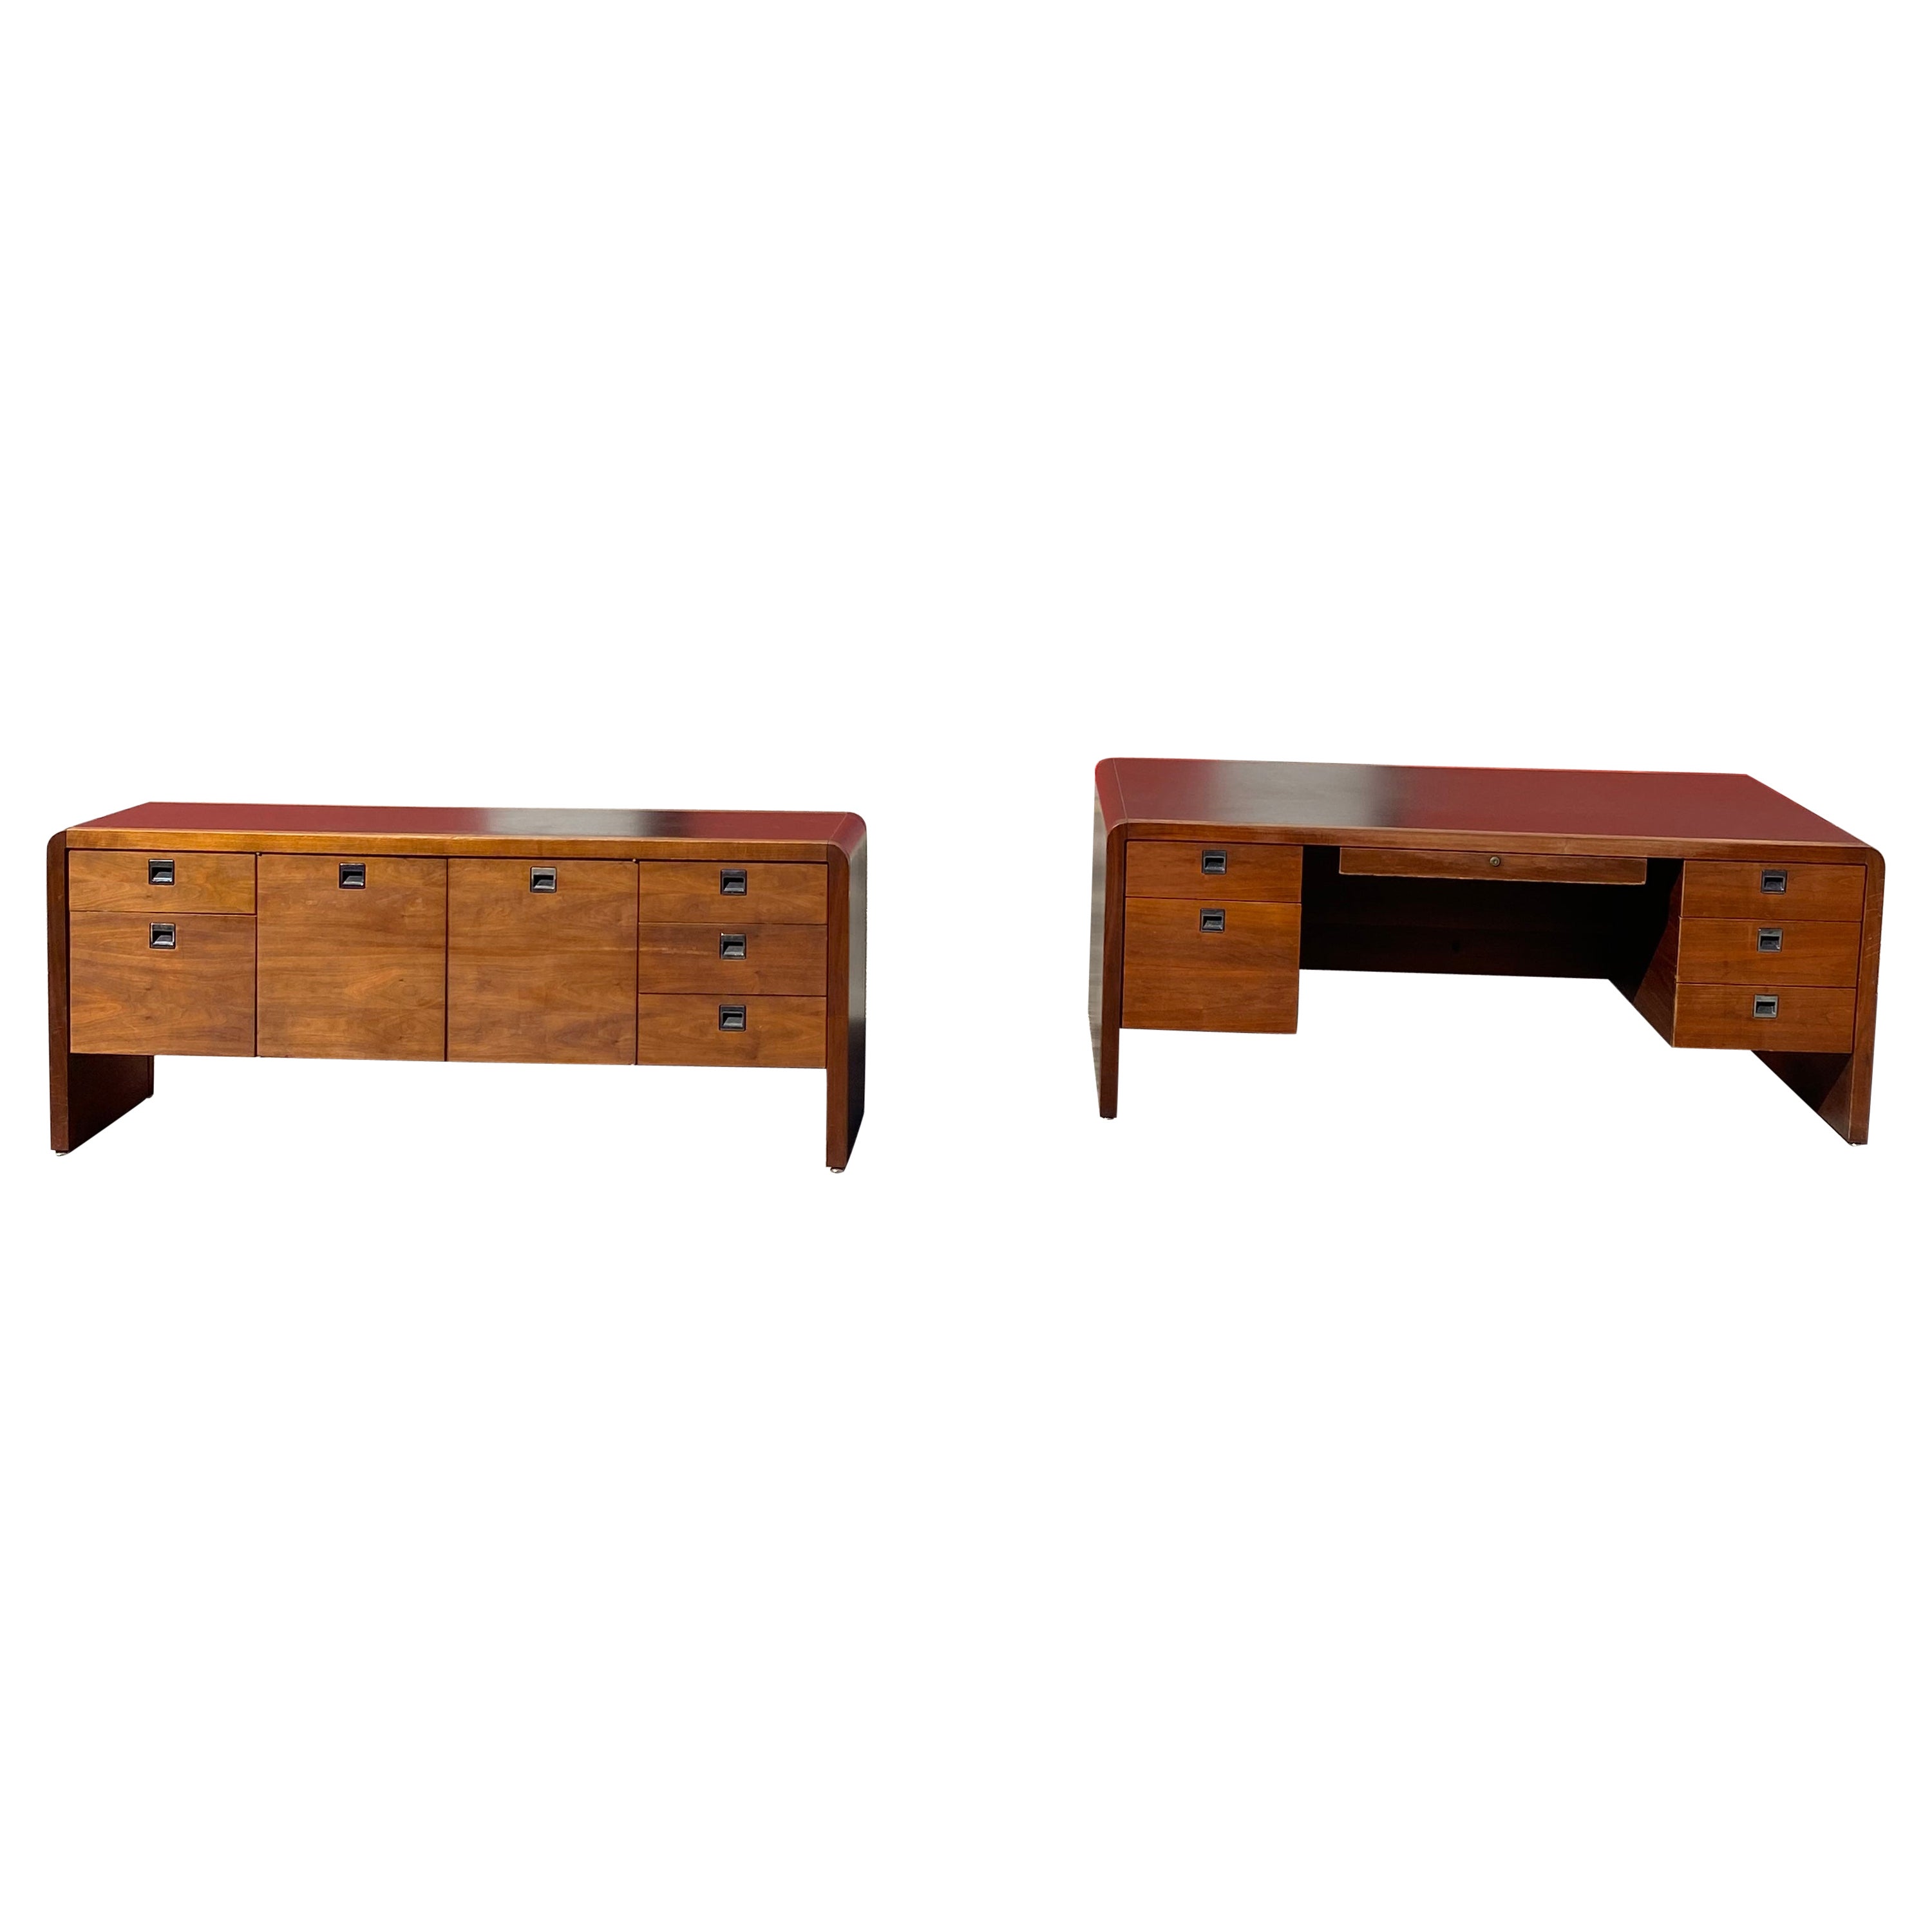 1970s Walnut Executive Campaign Waterfall Desk And Cabinet, Set of 2